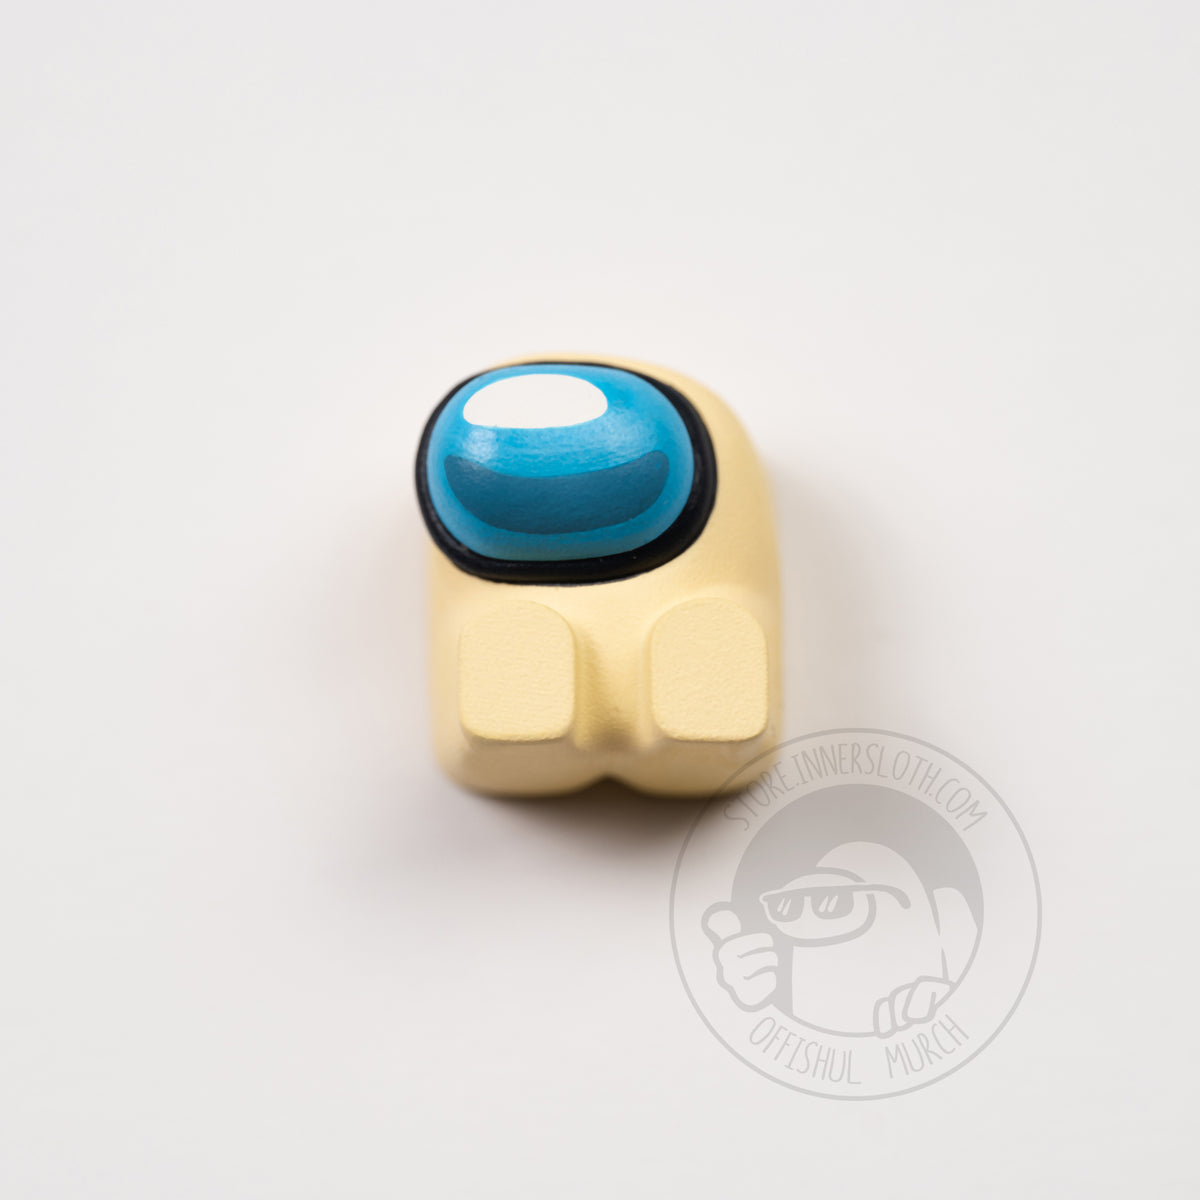 A product photo from above of the banana keyboard keycap.